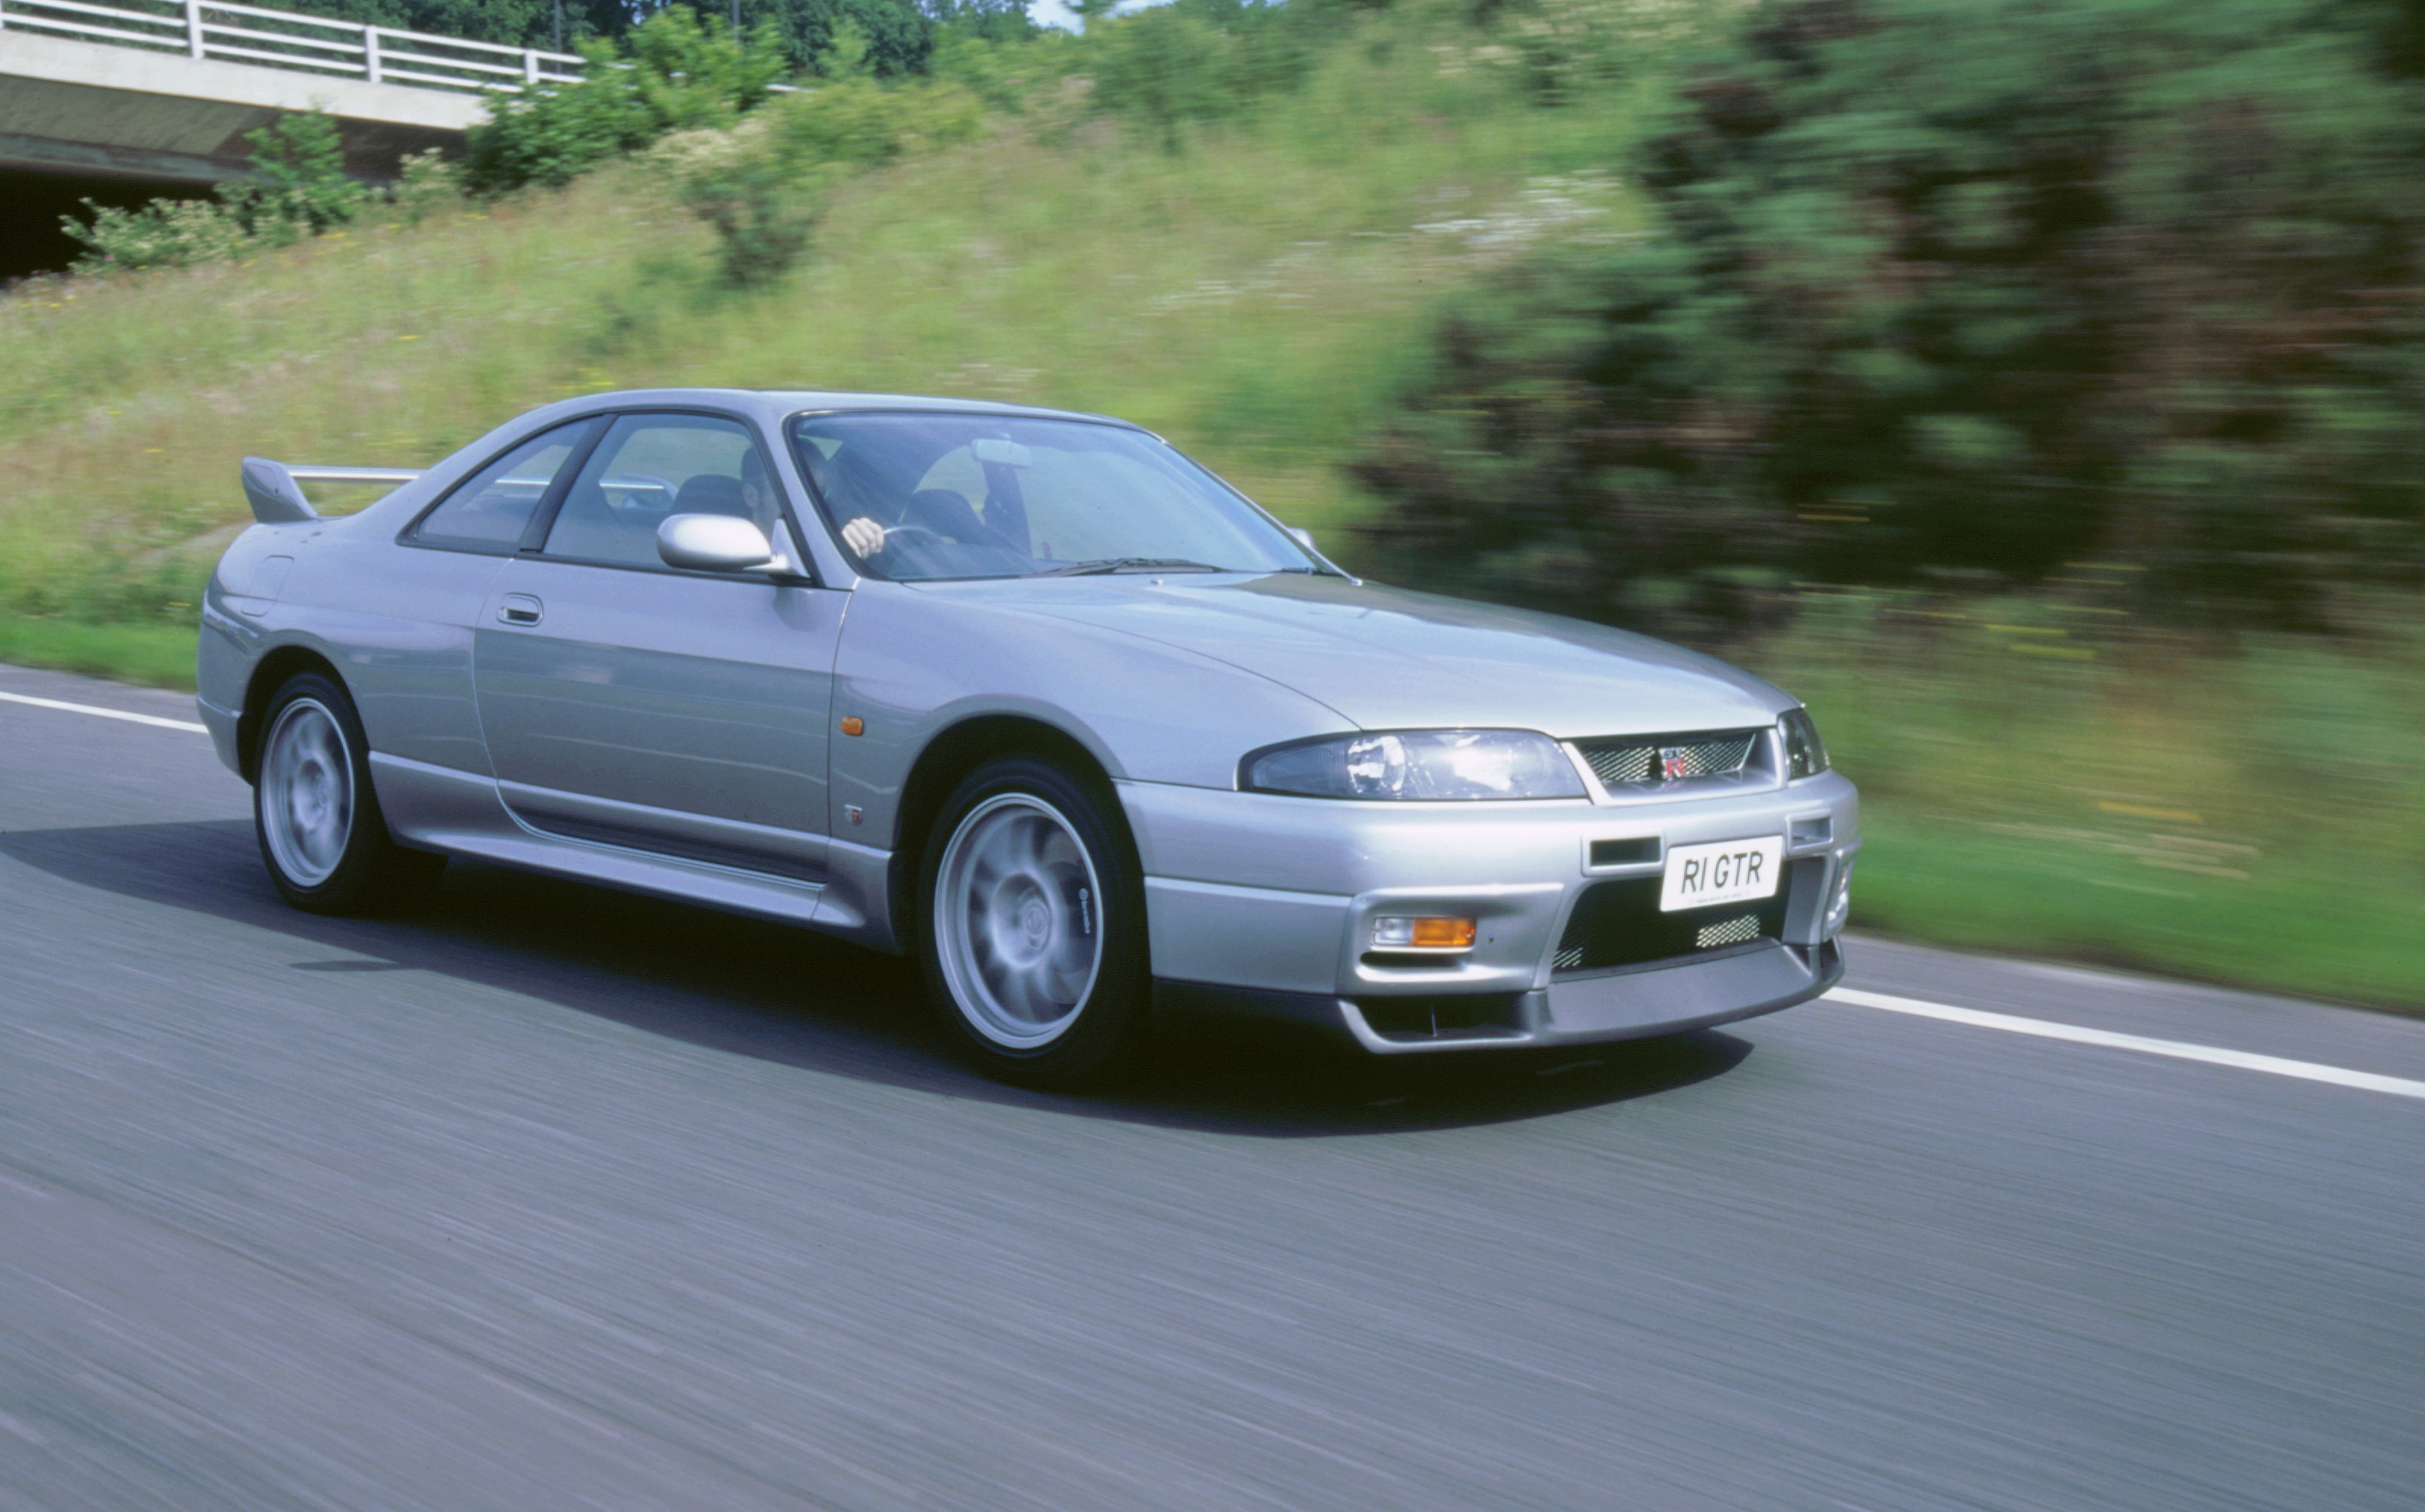 The Nissan R33 Skyline GT-R Hides Its Speed in Plain Sight